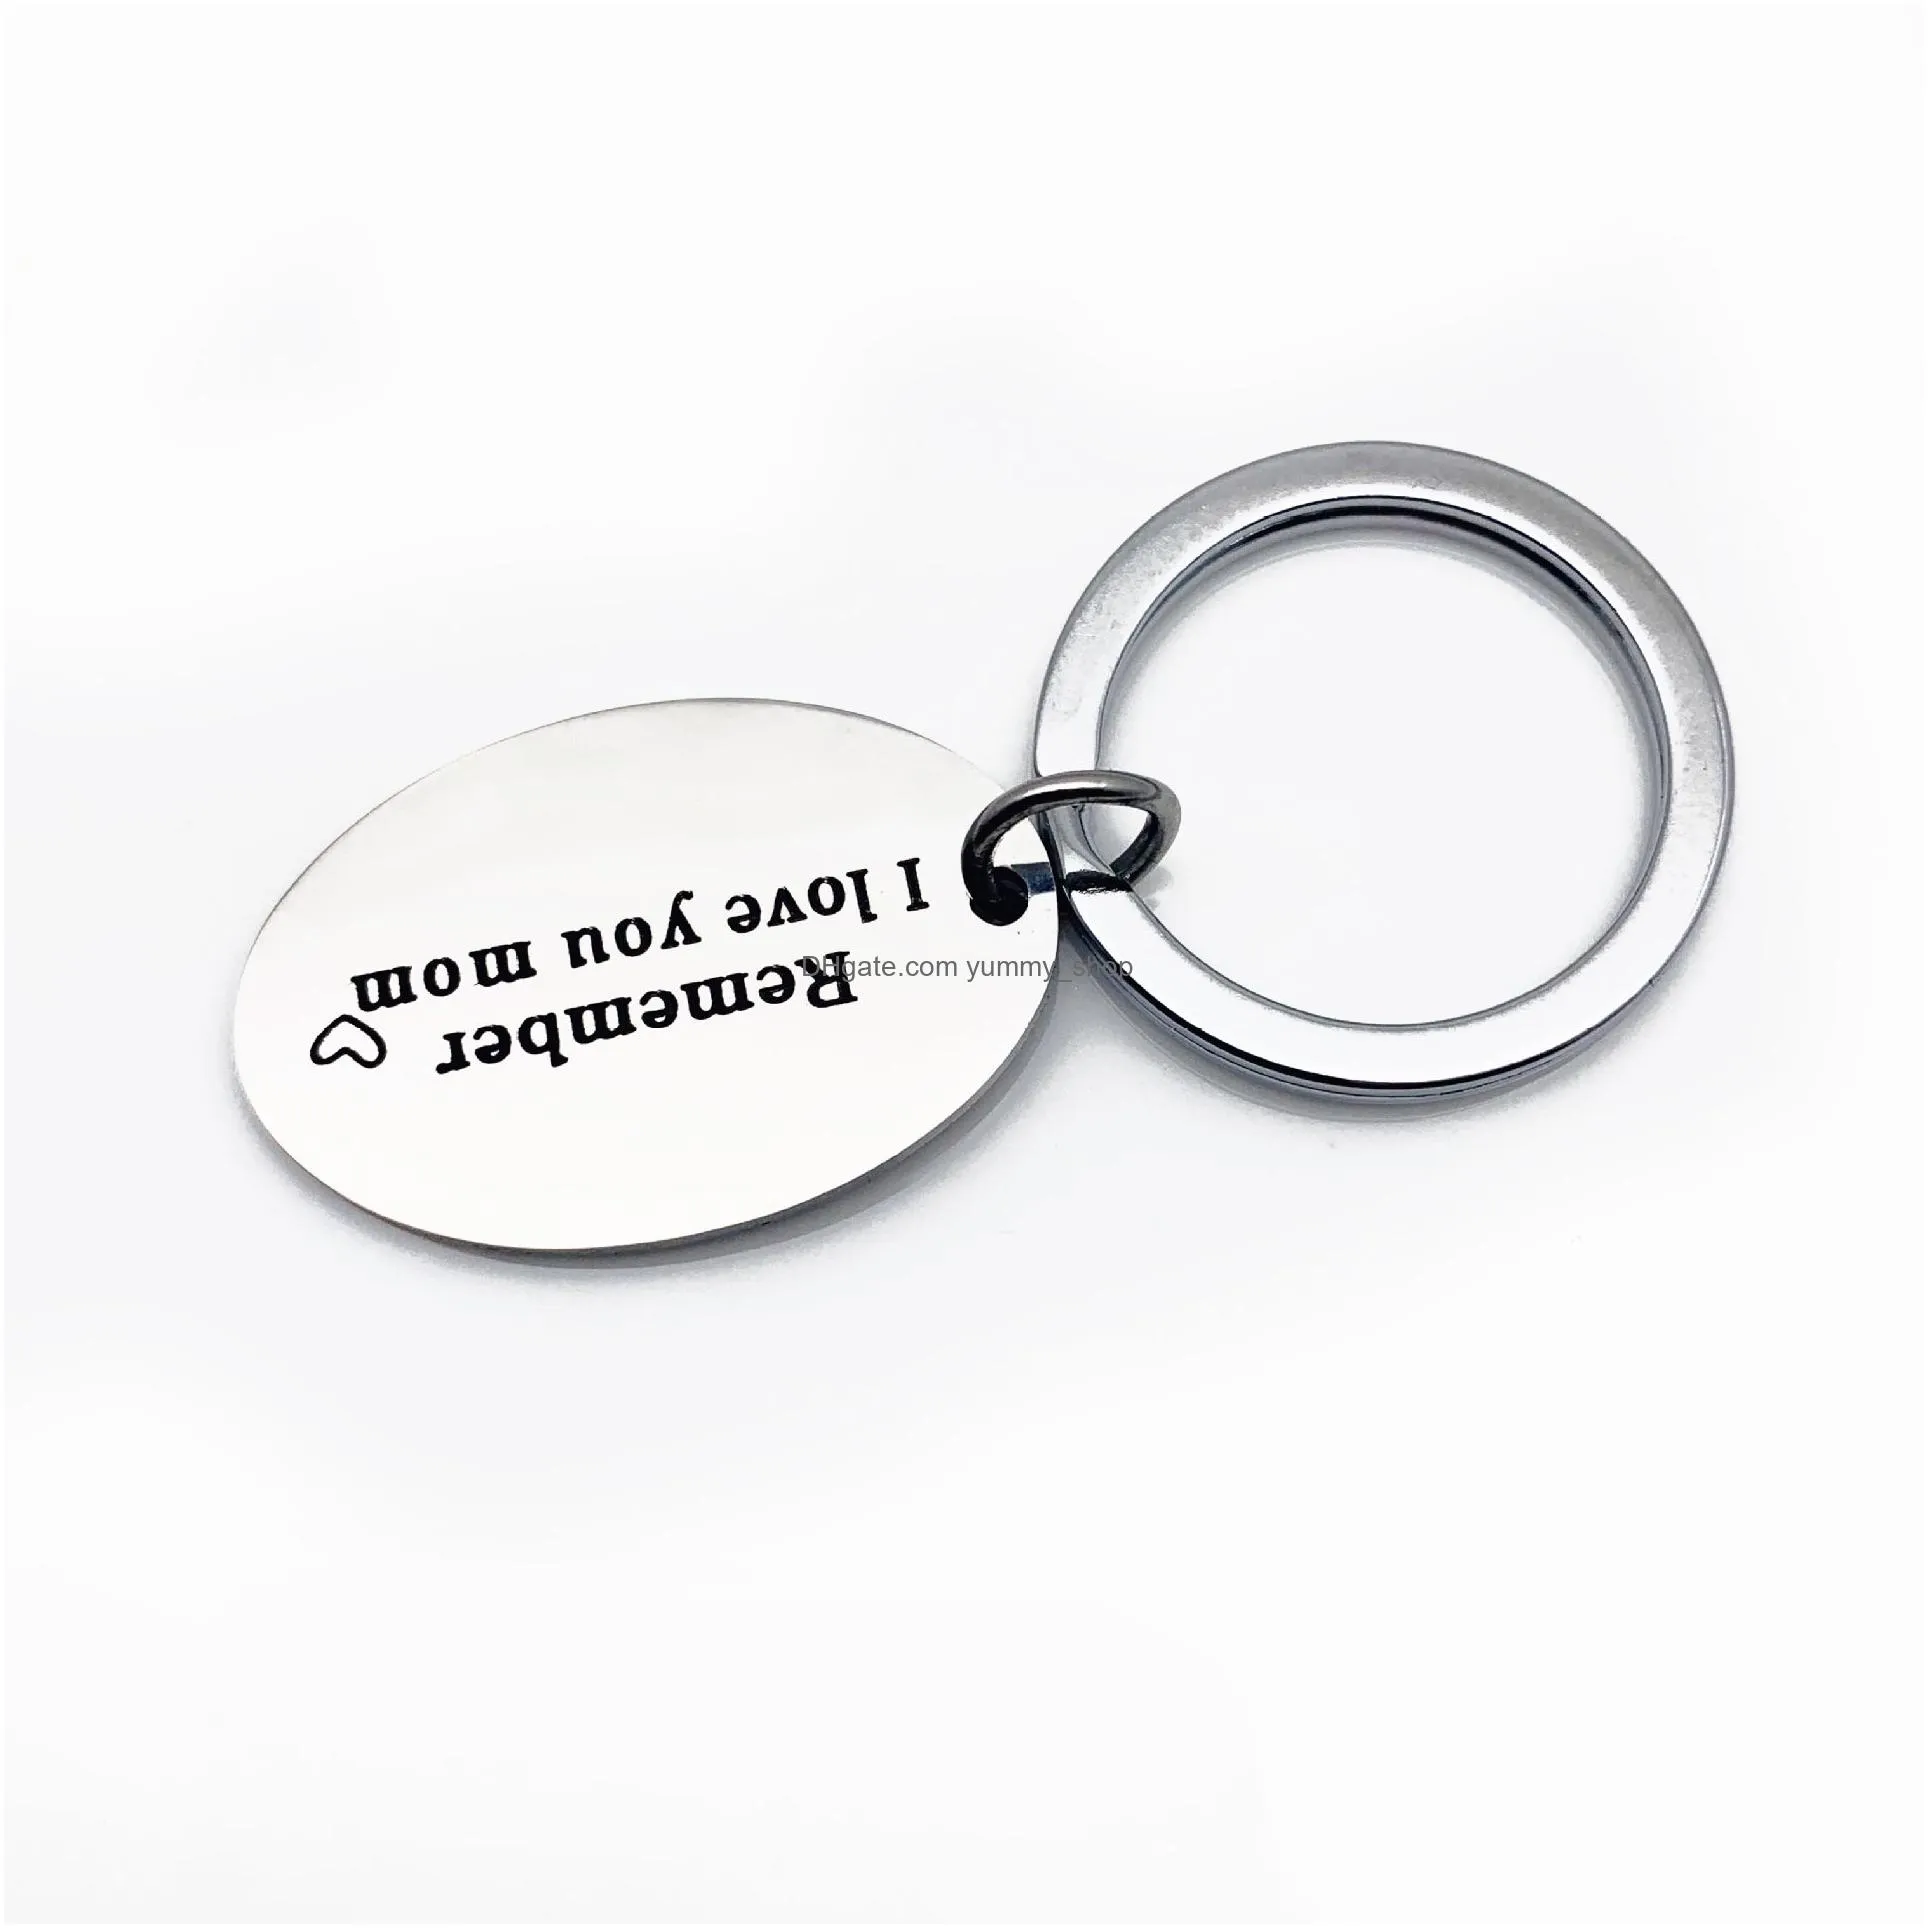  arrival stainless steel keychain for mom engraved letter remember i love you mom pendant keychain fashion jewelry mothers day